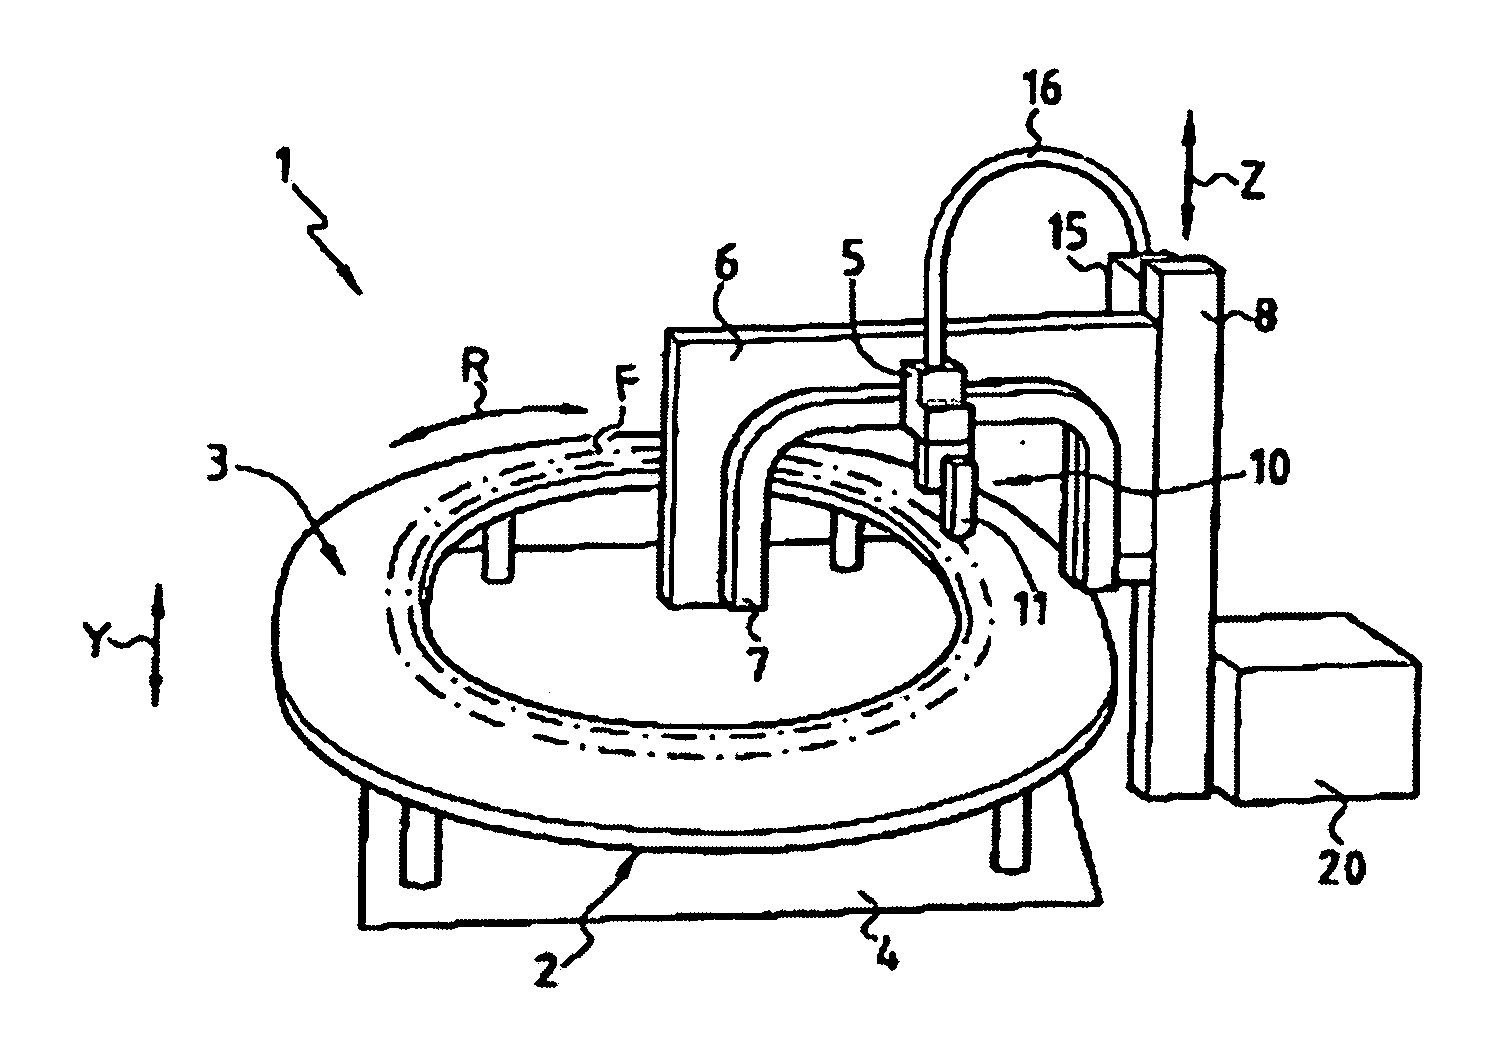 Process and system for fabricating a reinforcing preform